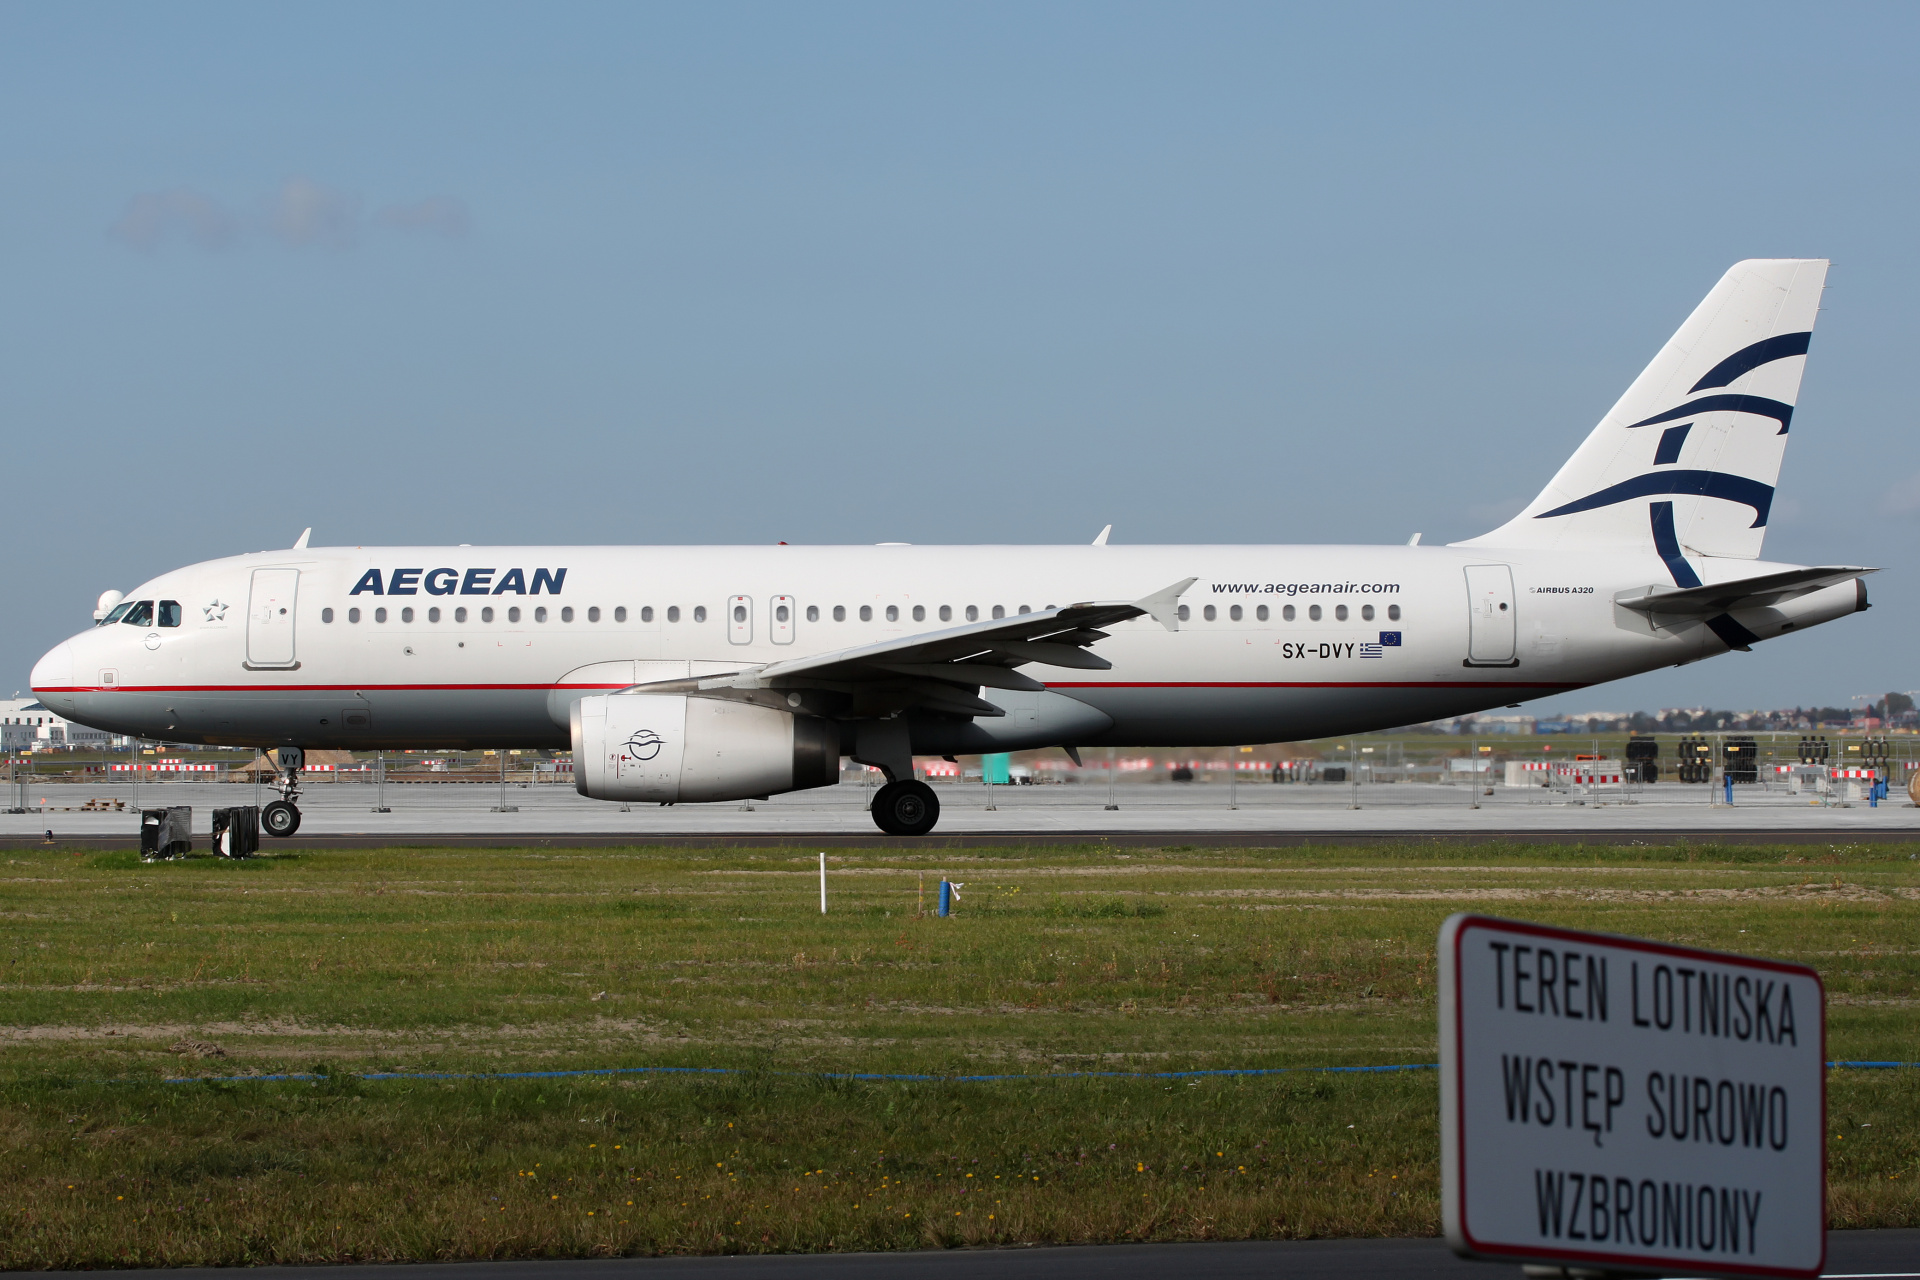 SX-DVY (Aircraft » EPWA Spotting » Airbus A320-200 » Aegean Airlines)